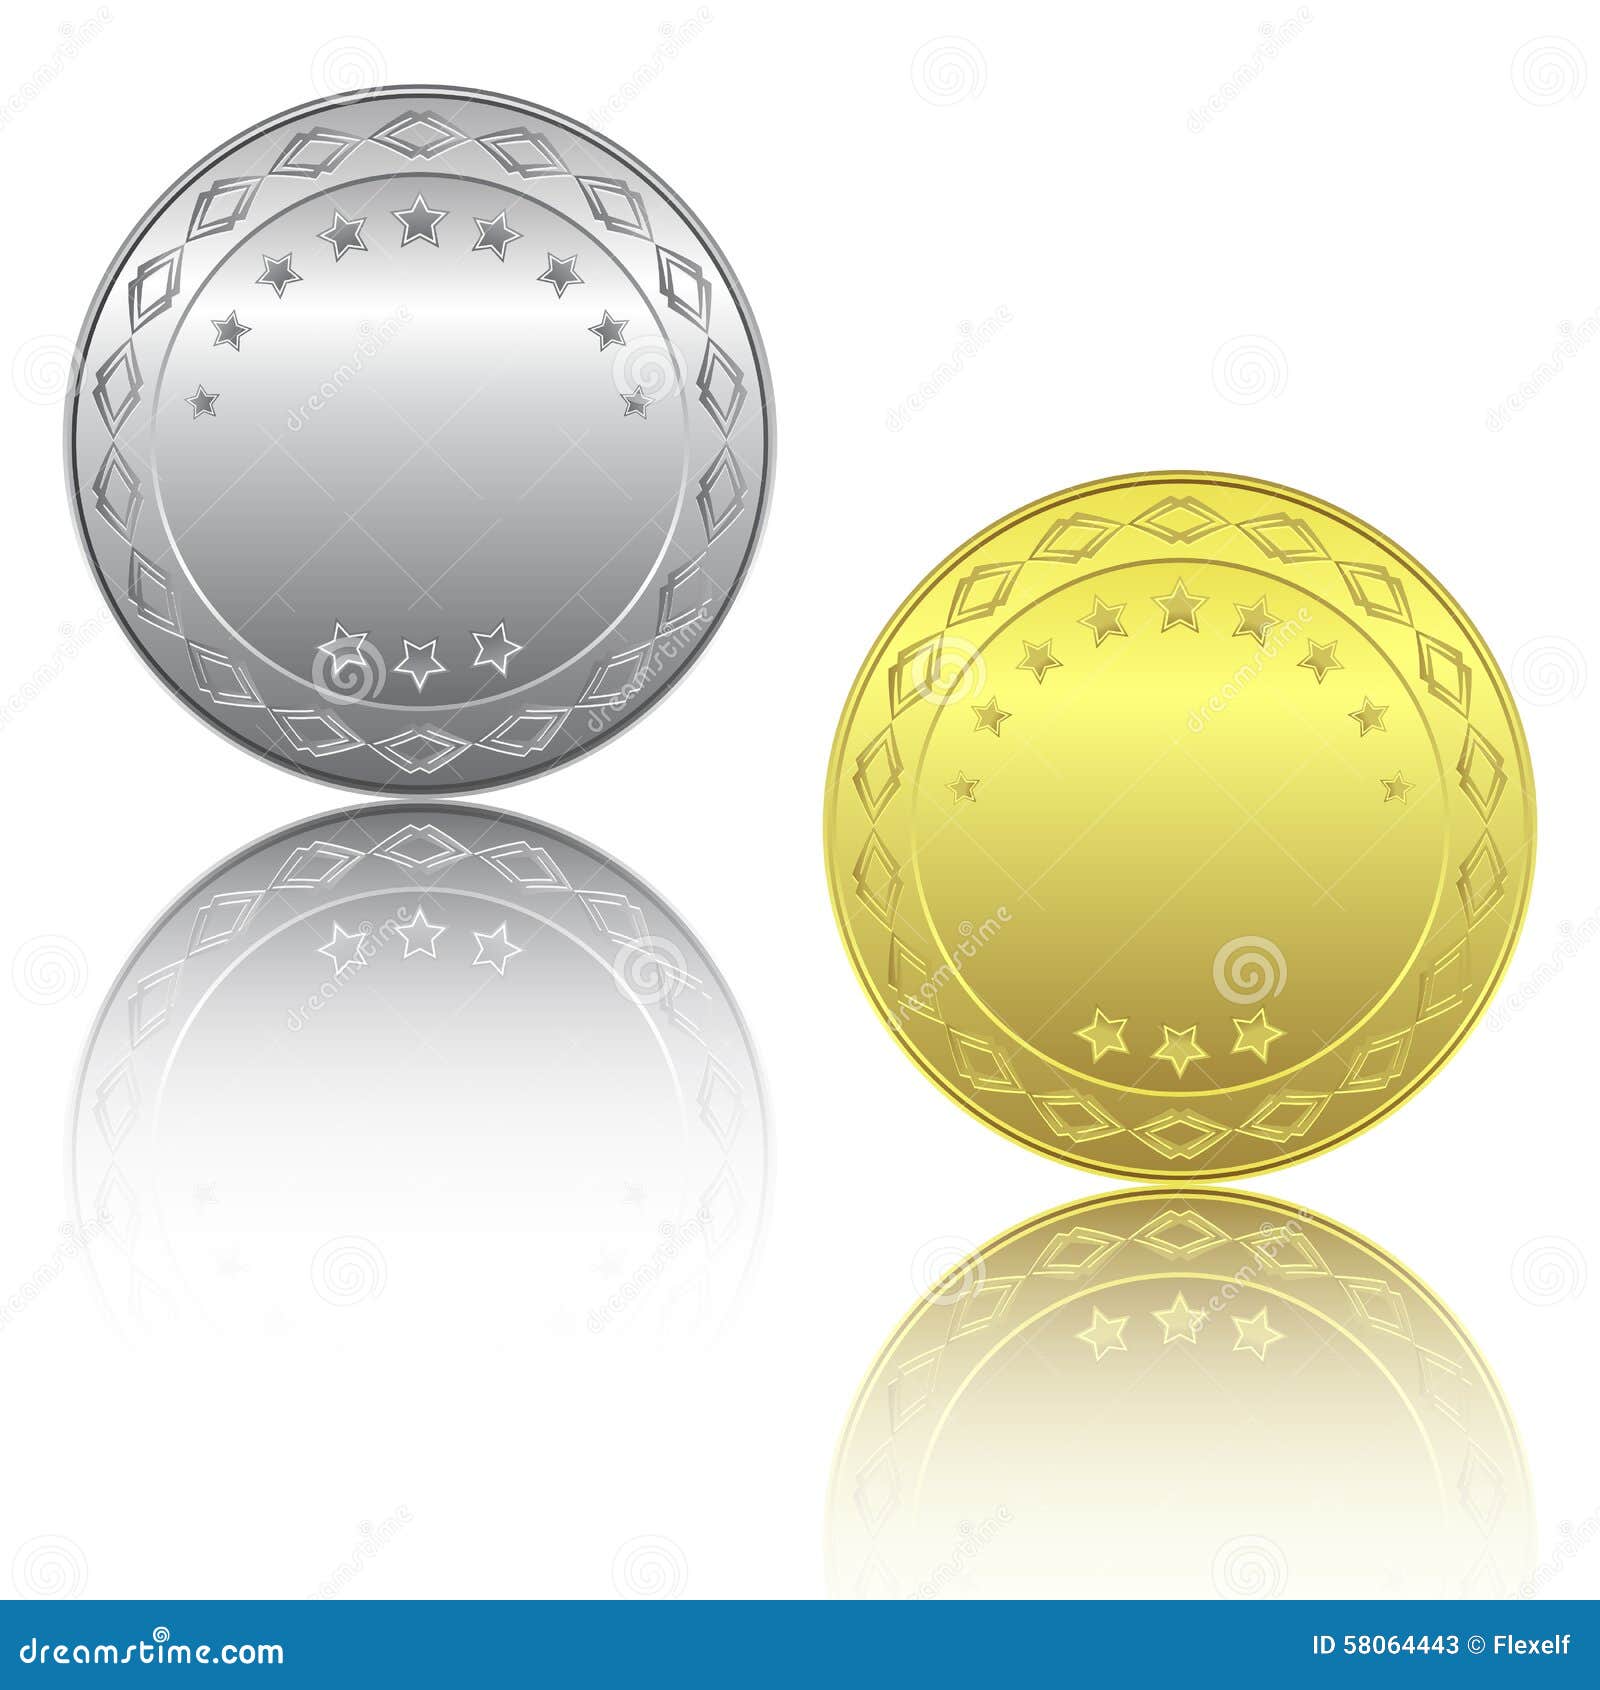 Silver and gold coins stock vector. Illustration of light - 58064443